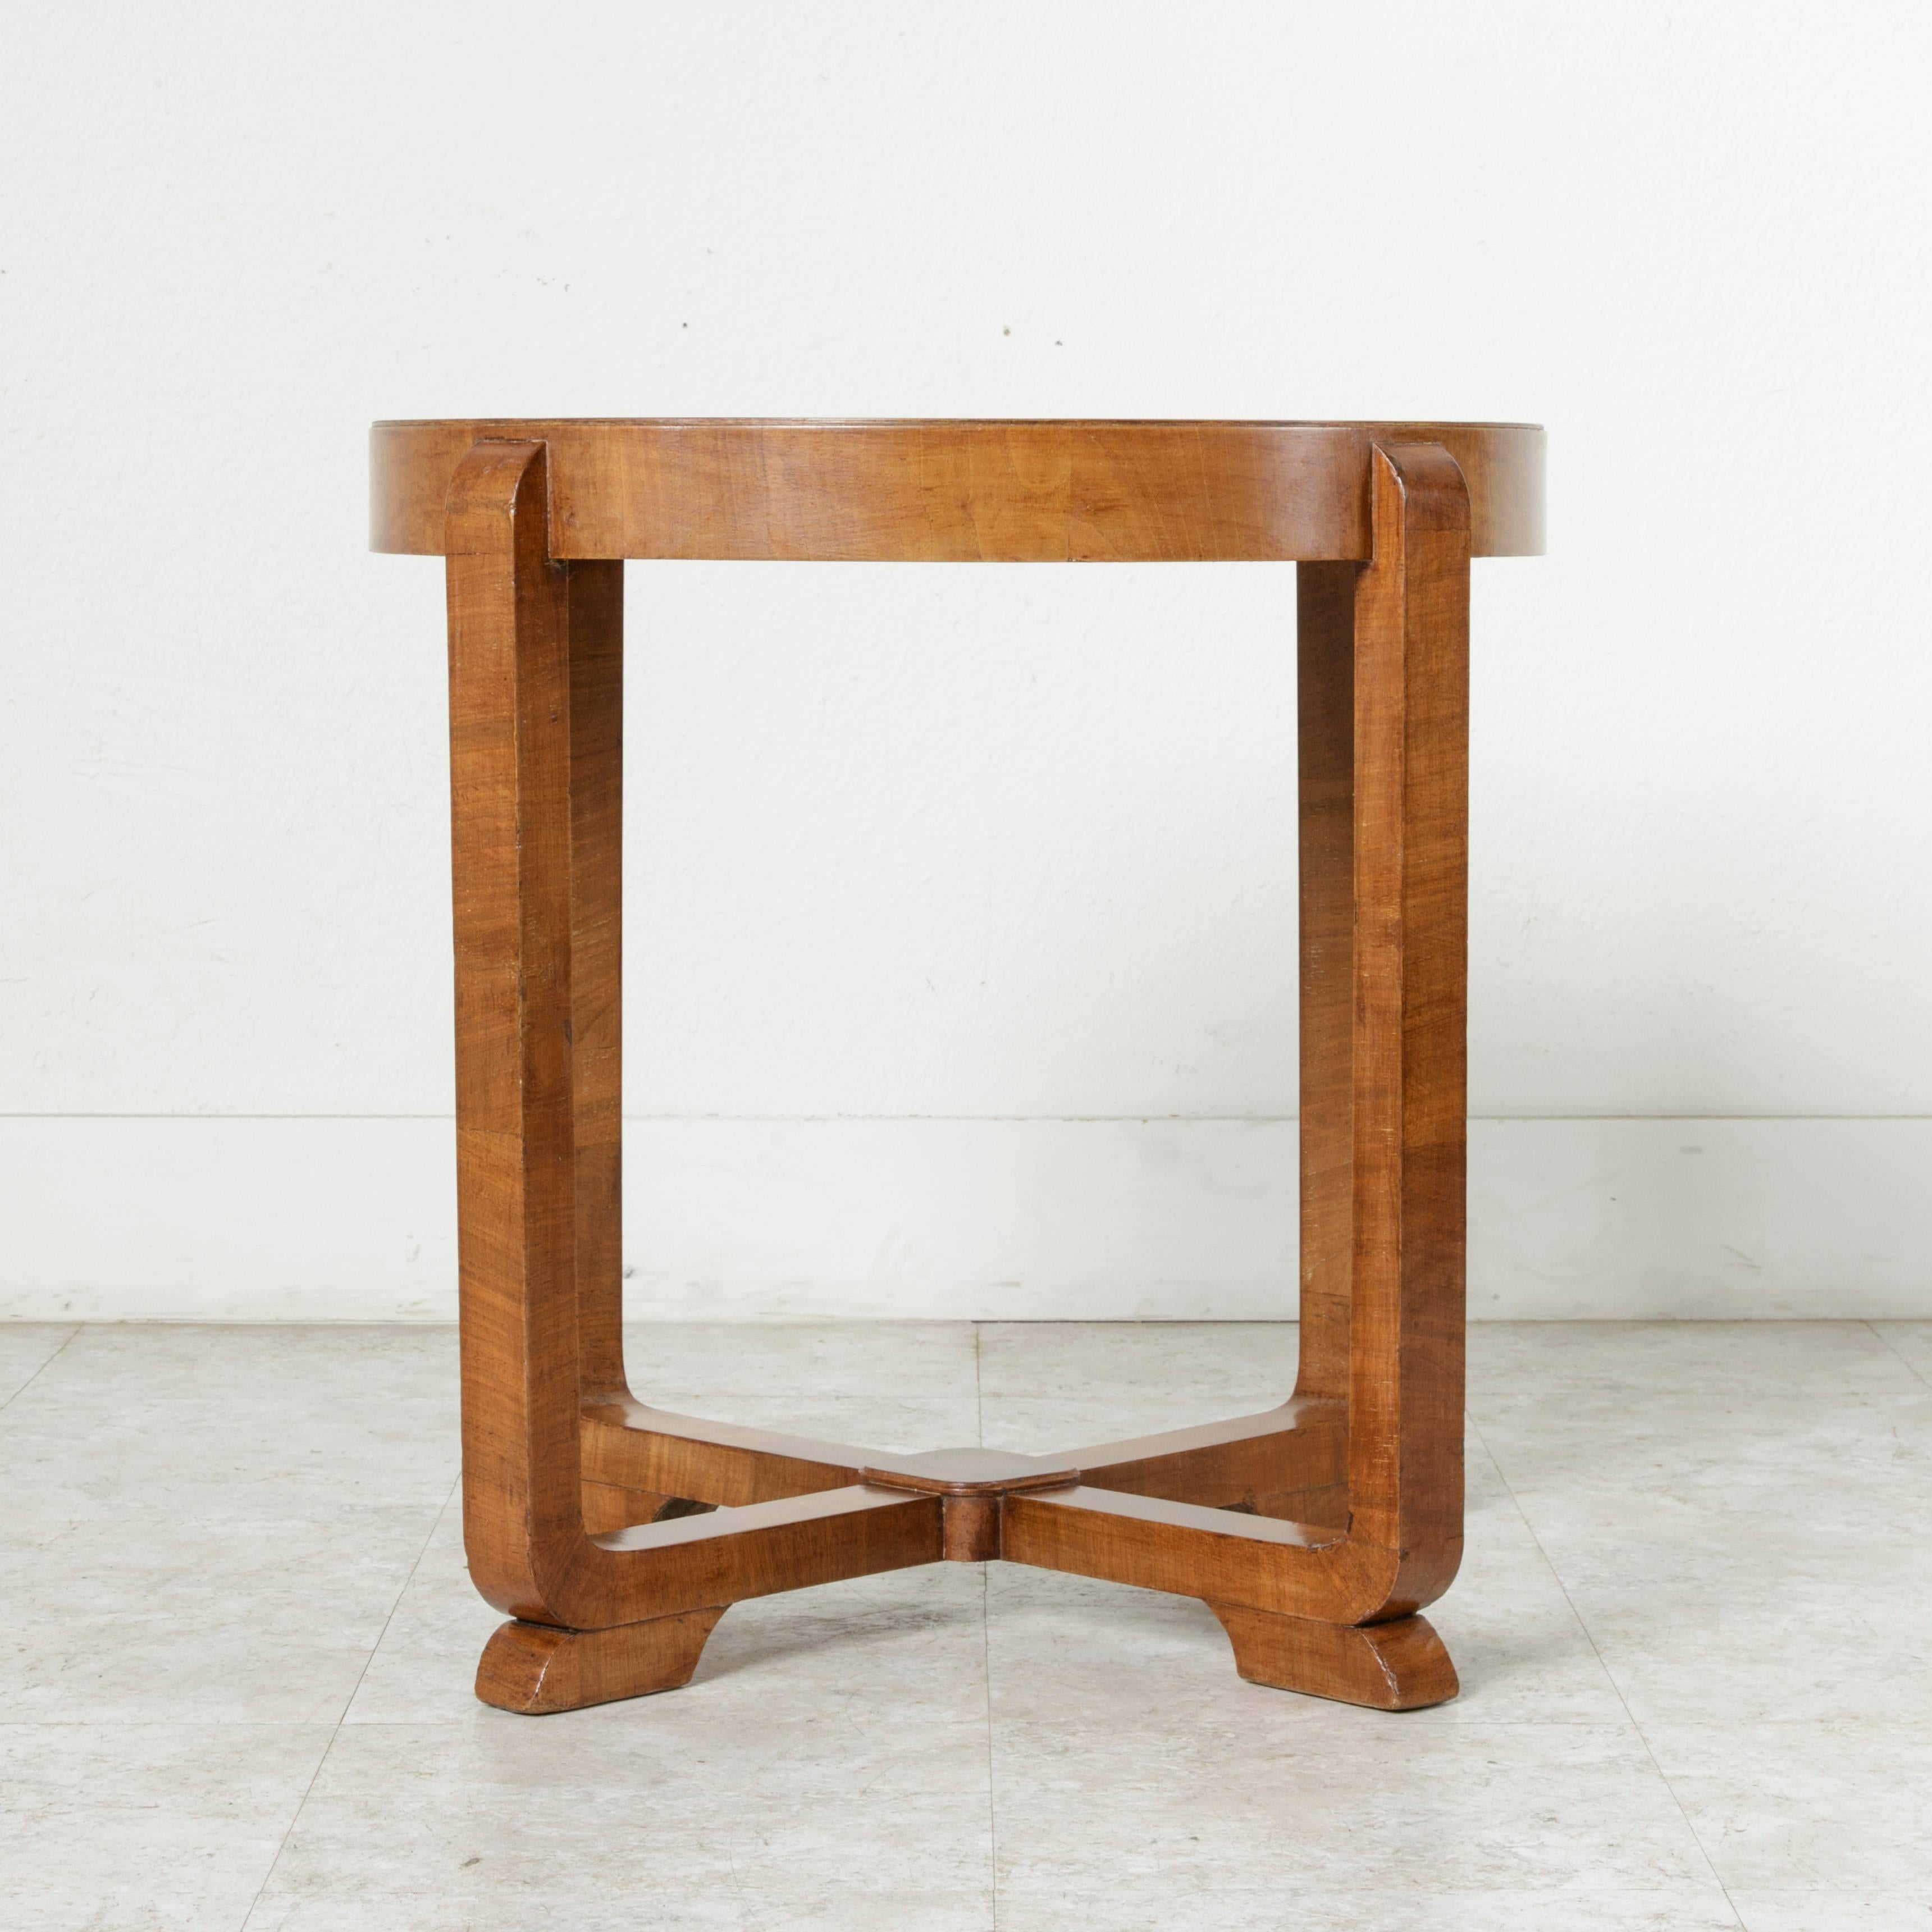 French Art Deco Period Bookmatched Burl Walnut Side Table, Occasional Table 1